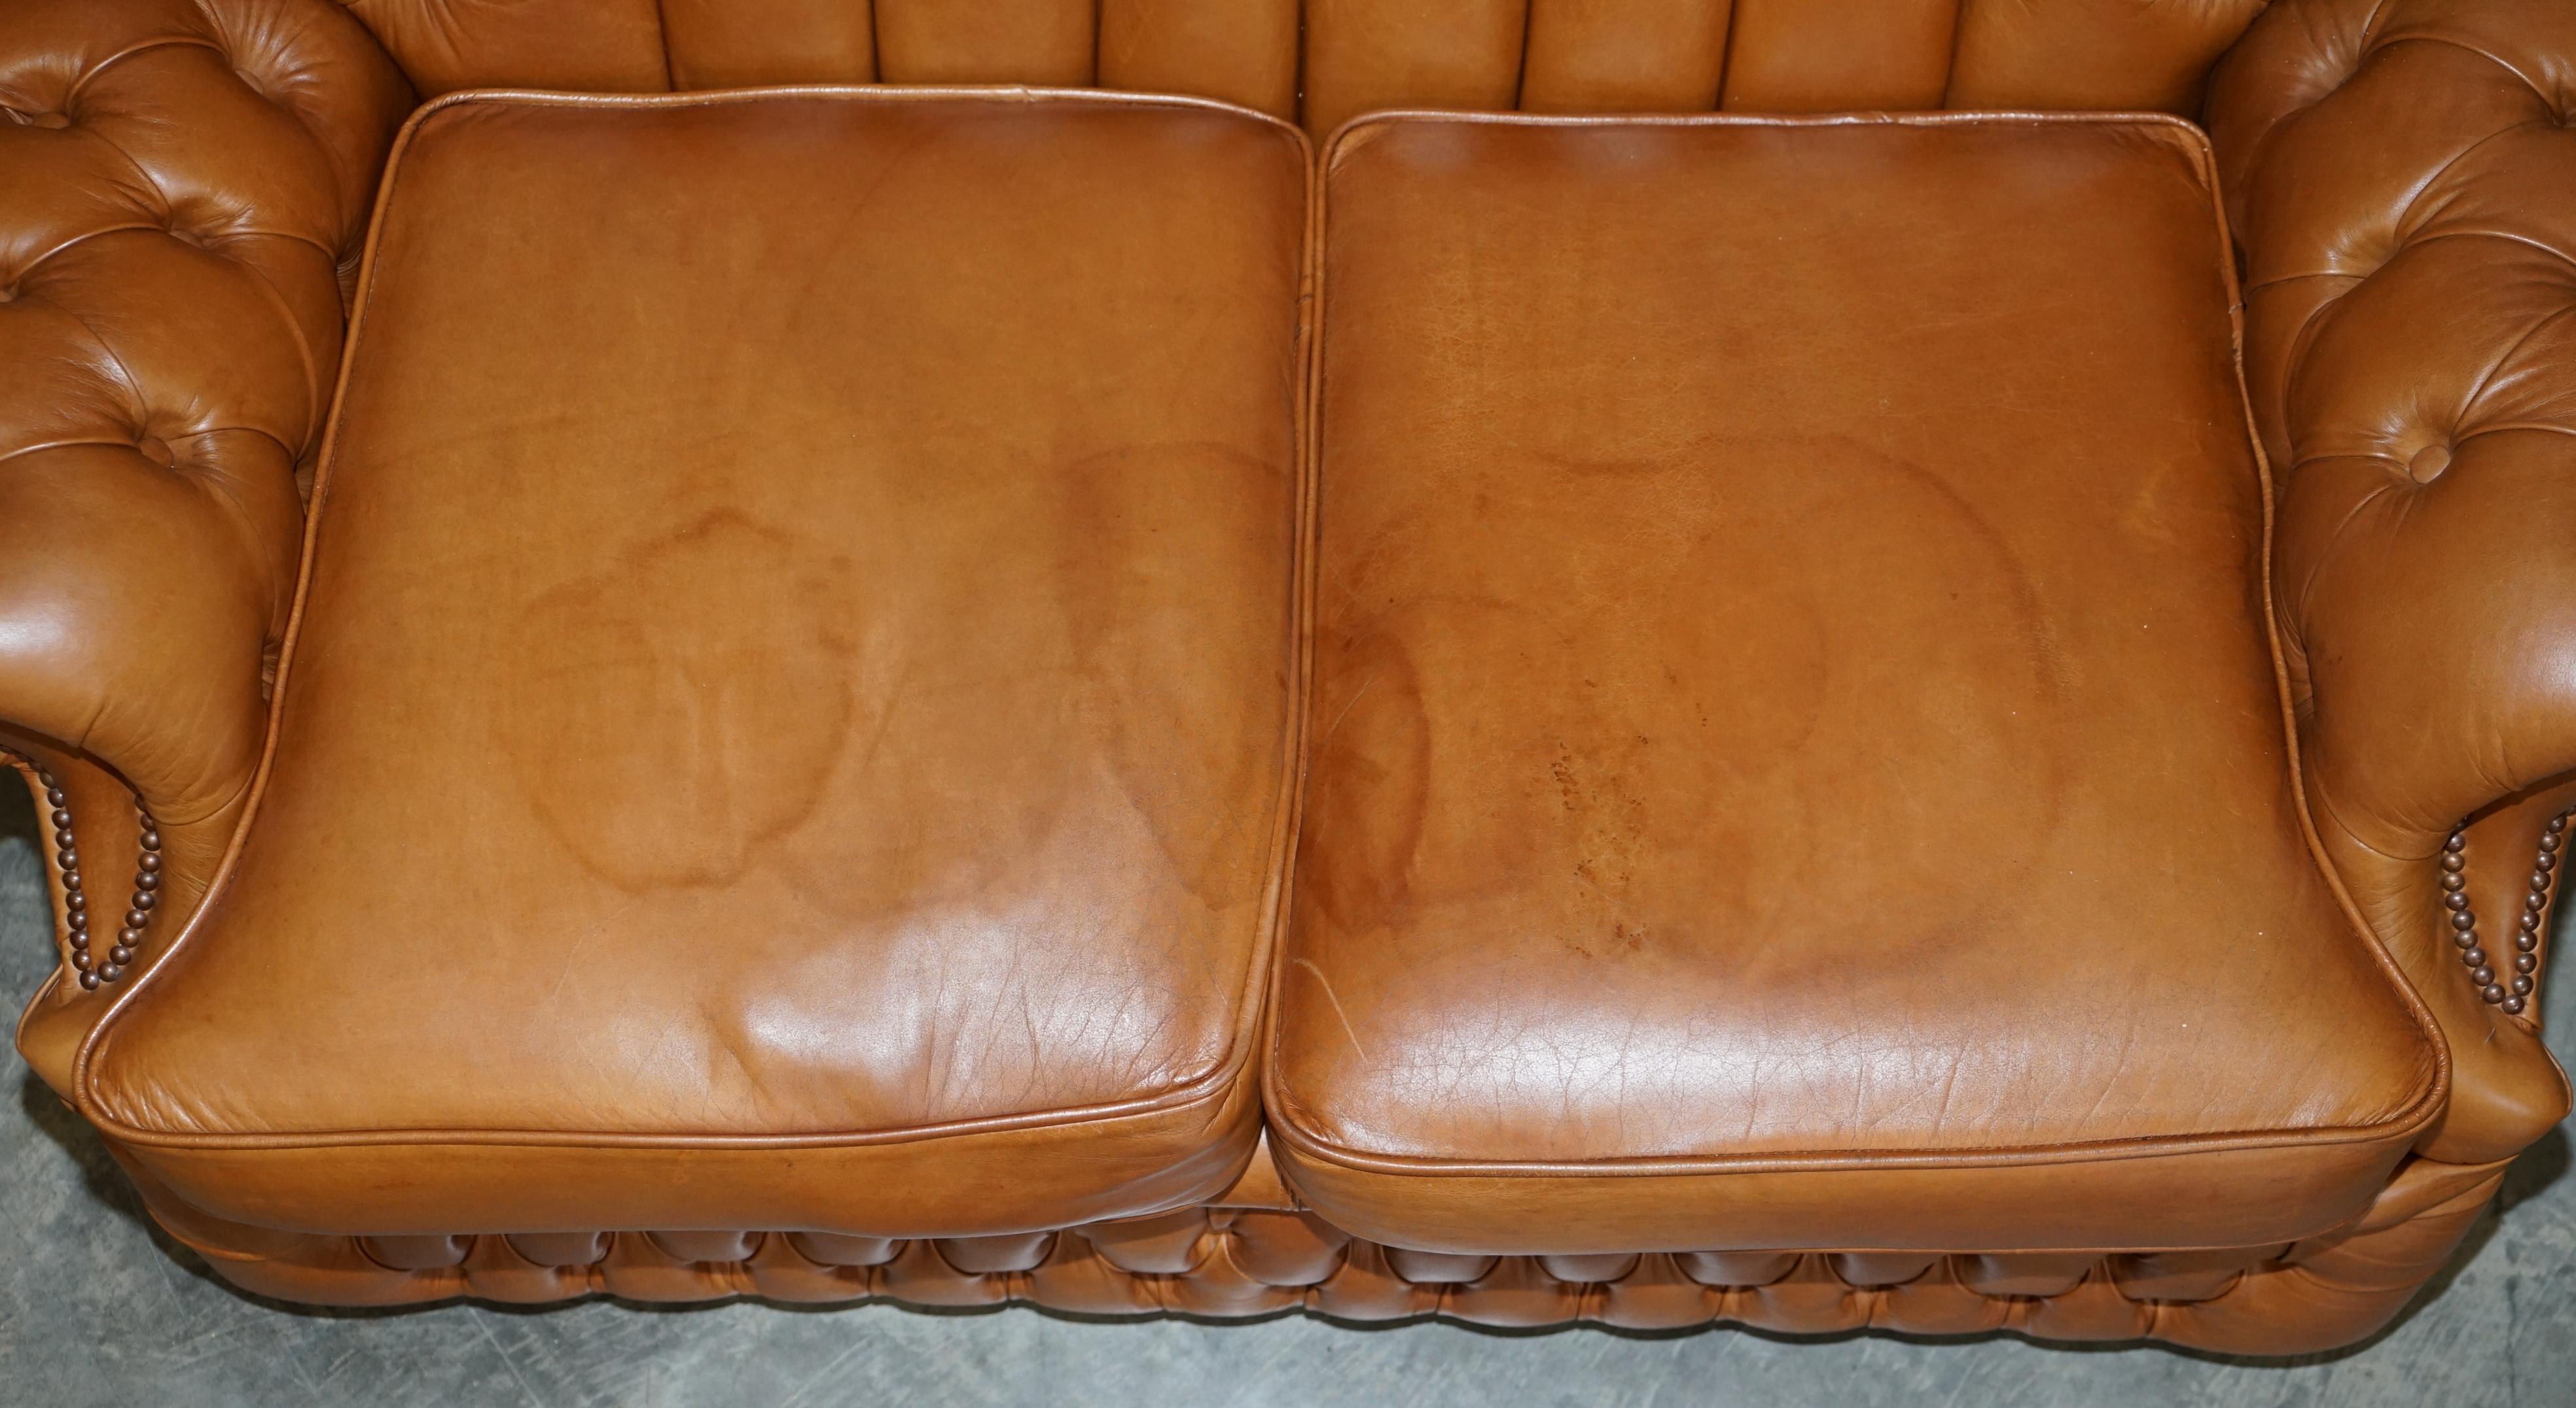 Hand-Crafted Small Wide Chesterfield Tan Brown Leather Tufted Sofa with High Back